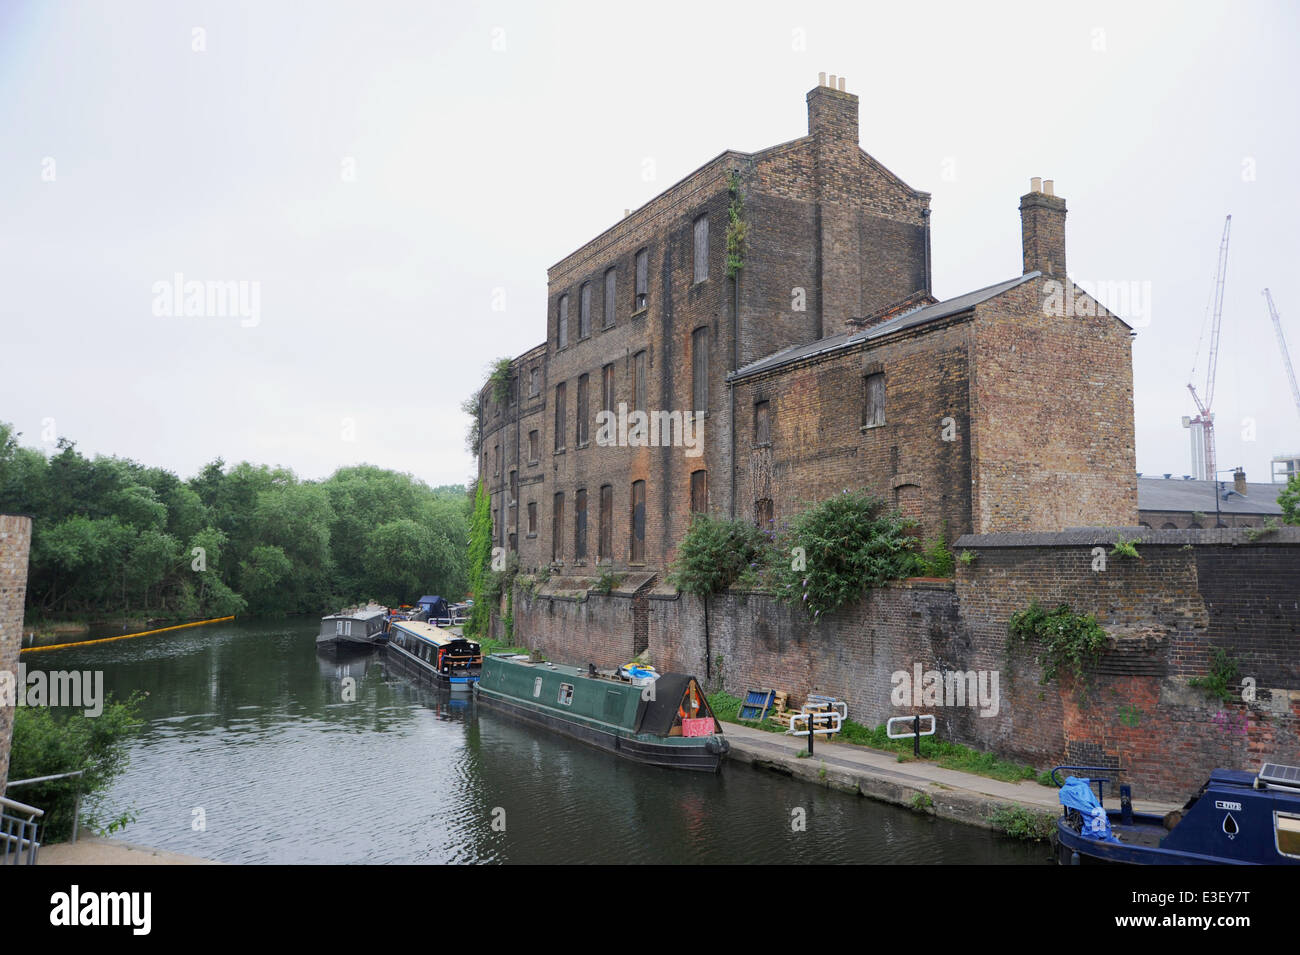 The Regent Canal at Kings Cross district London UK Photograph taken by Simon Dack Stock Photo